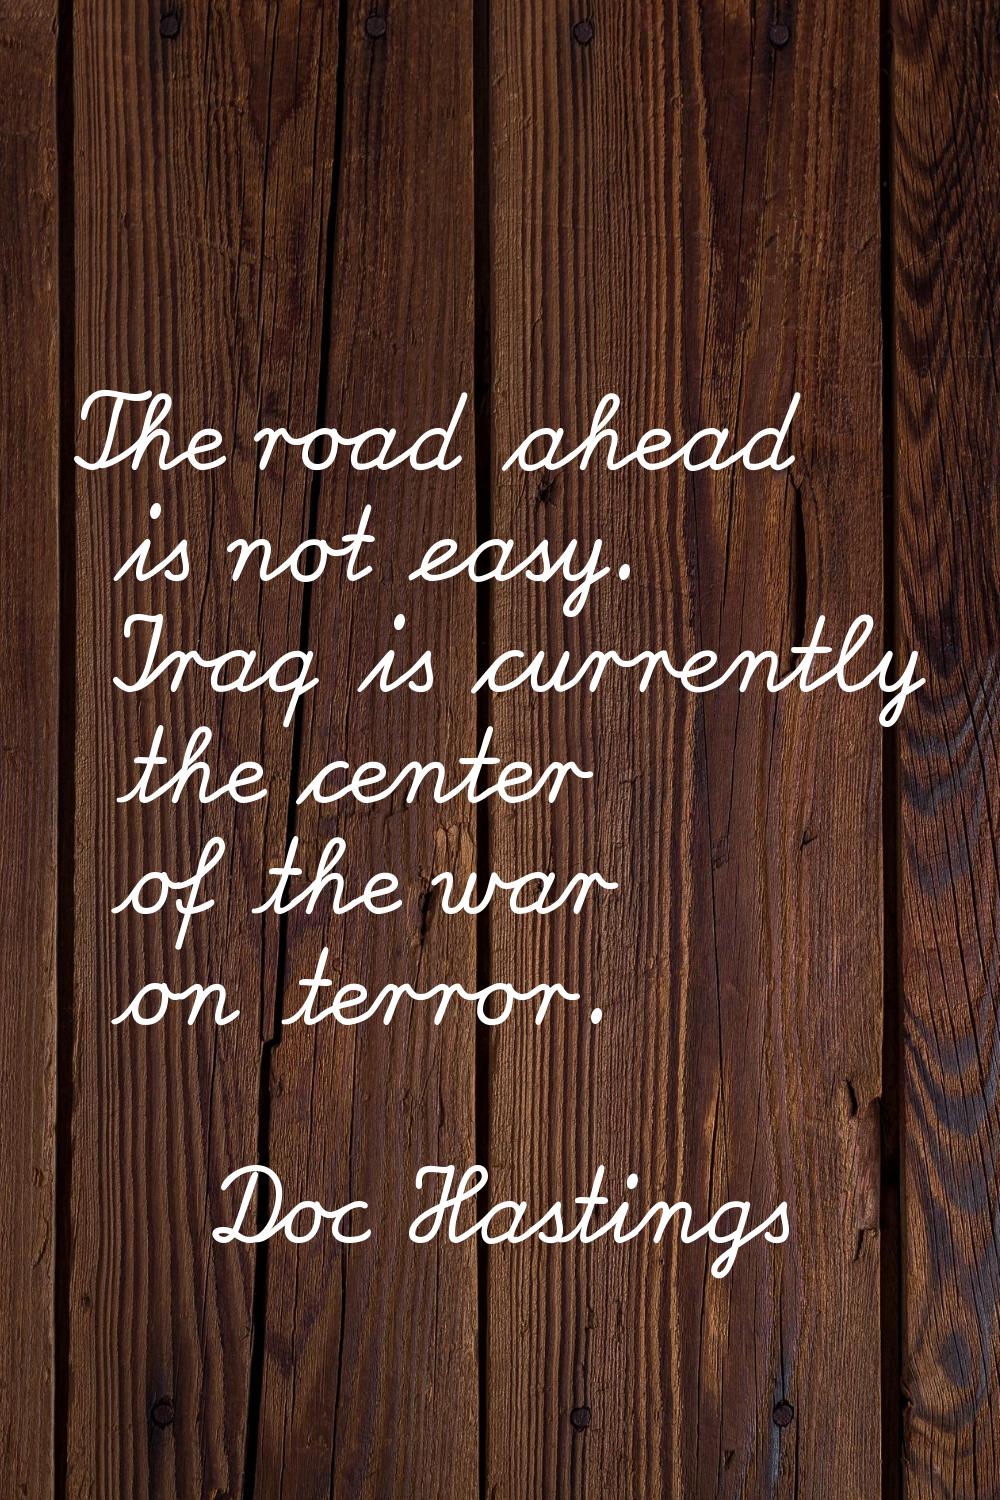 The road ahead is not easy. Iraq is currently the center of the war on terror.